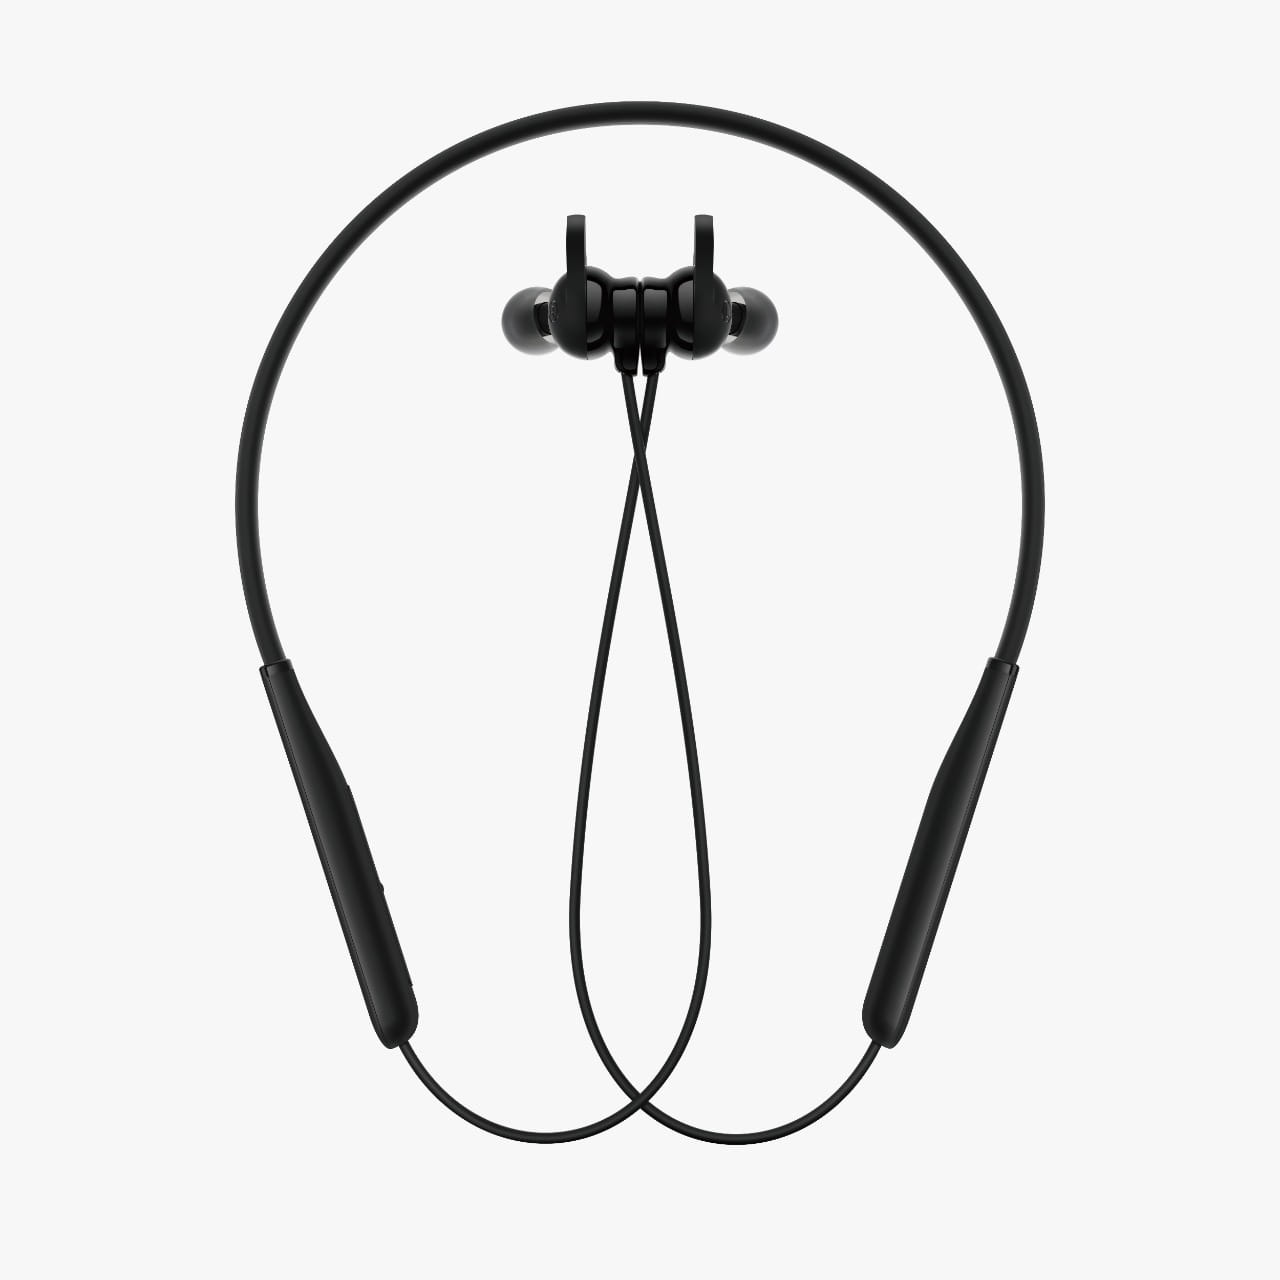 Vivo Wireless Sport Lite Neckband is claimed to offer up to 18 hours of music playback